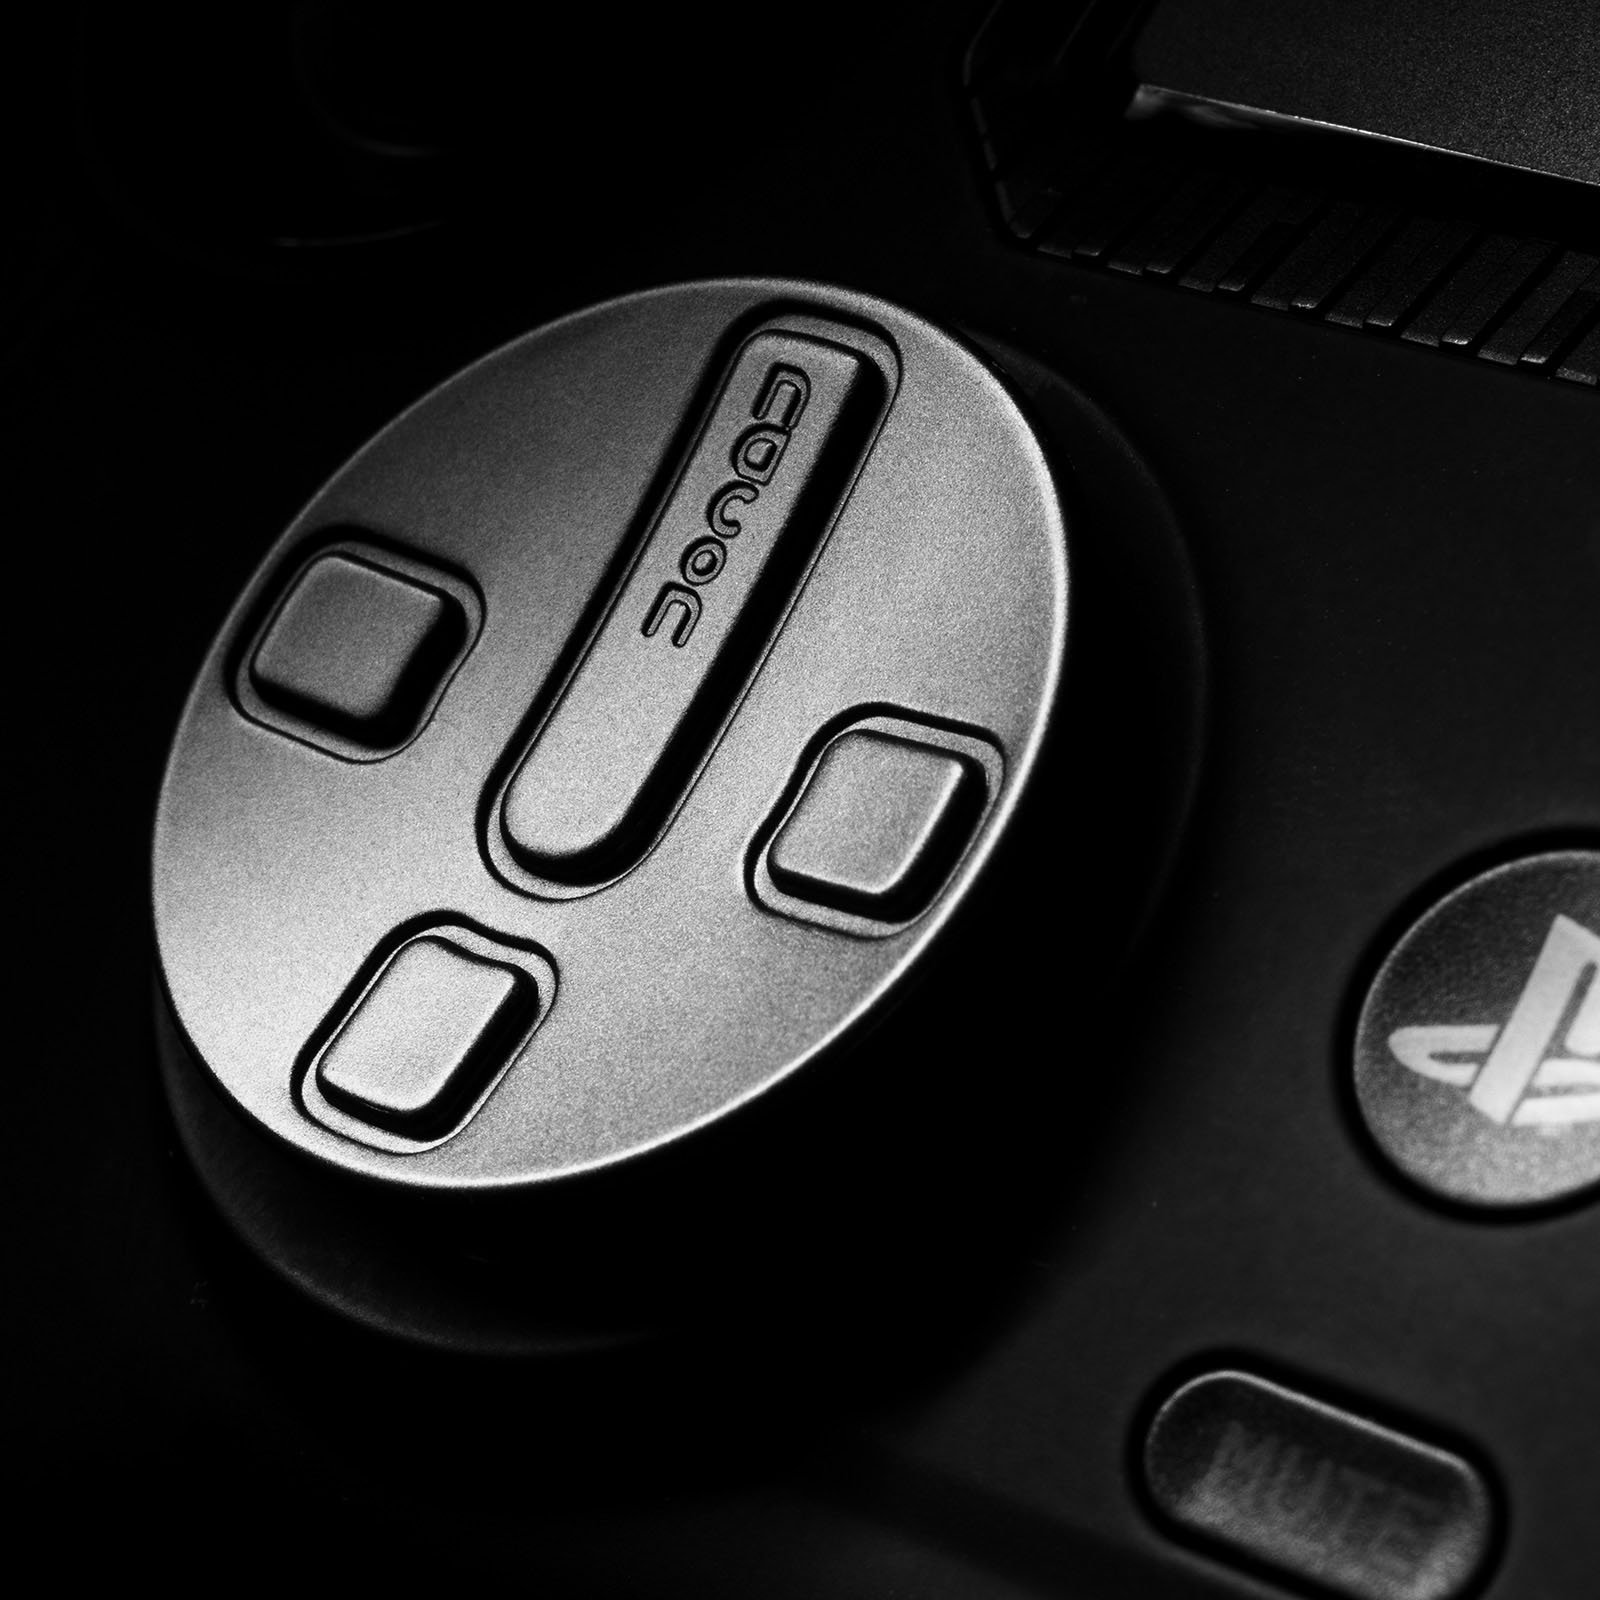 New Nacon Revolution 5 Pro Controller for PS5 Boasts Anti-drift Features